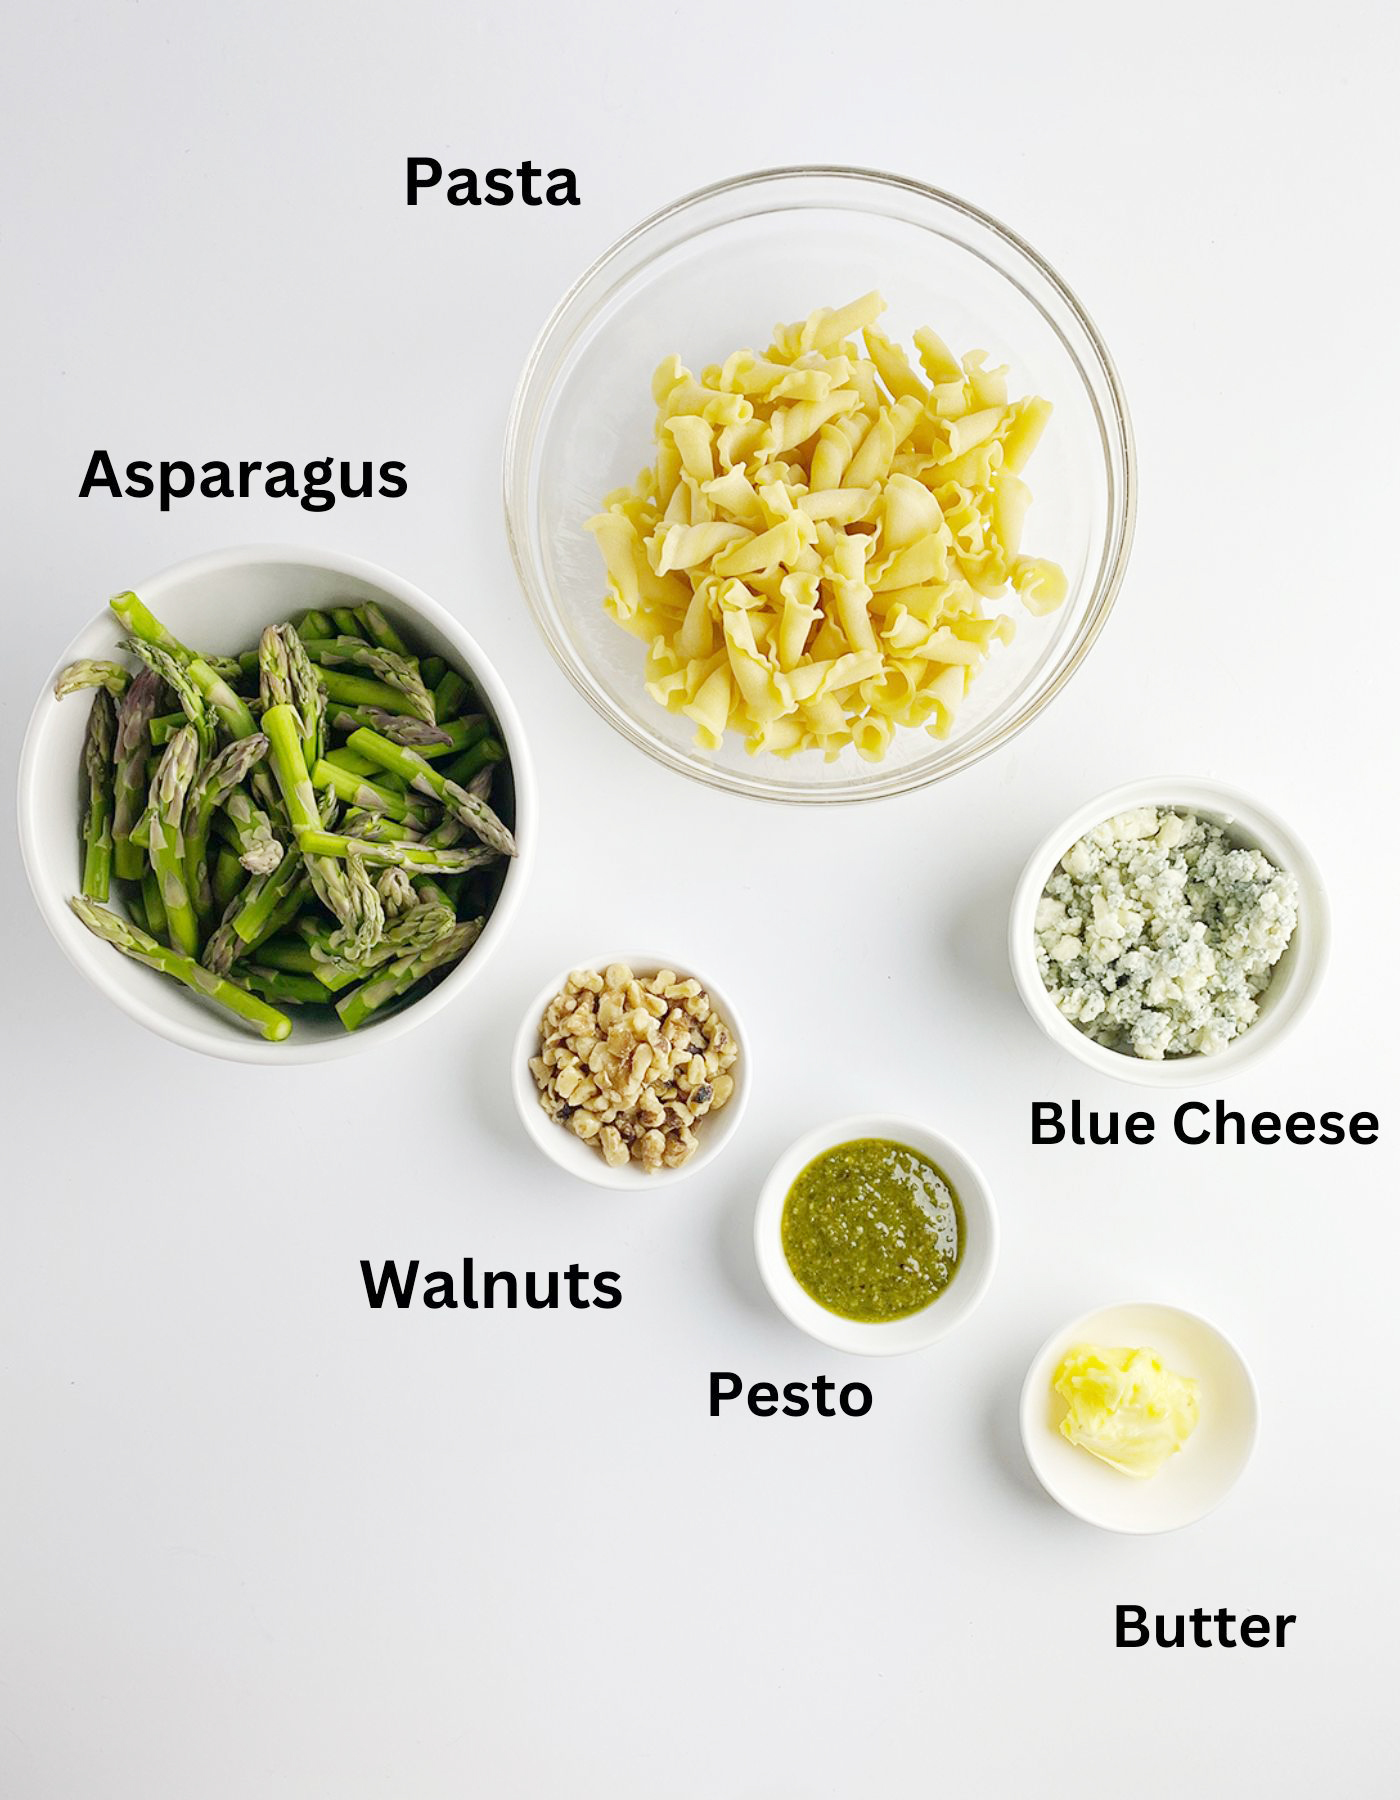 Ingredients for blue cheese pasta.